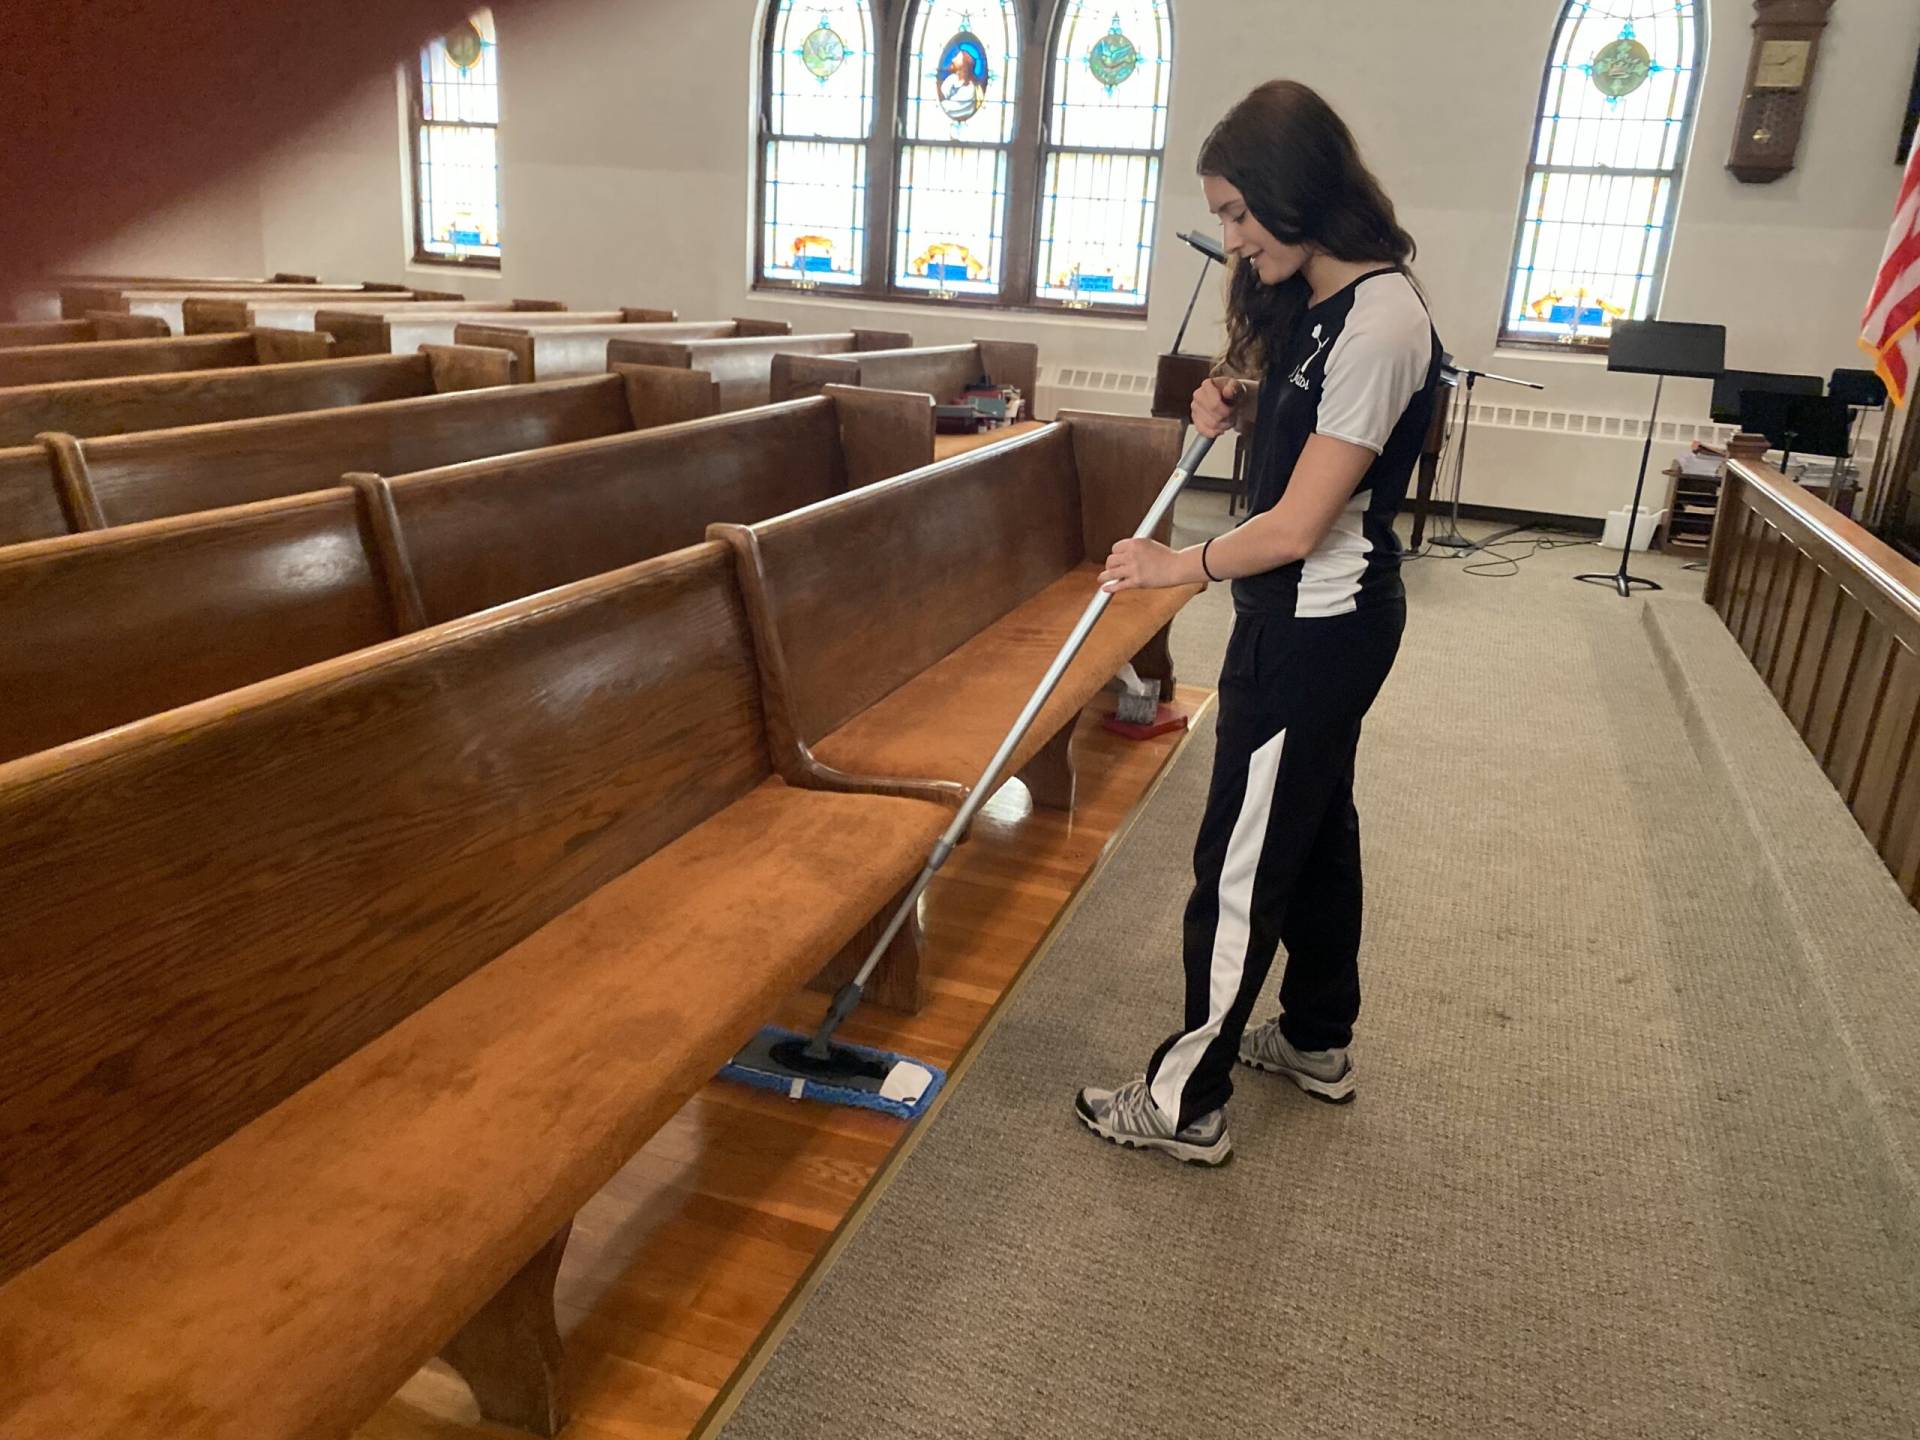 Jo Janitor Offers Houses of Worship Cleaning